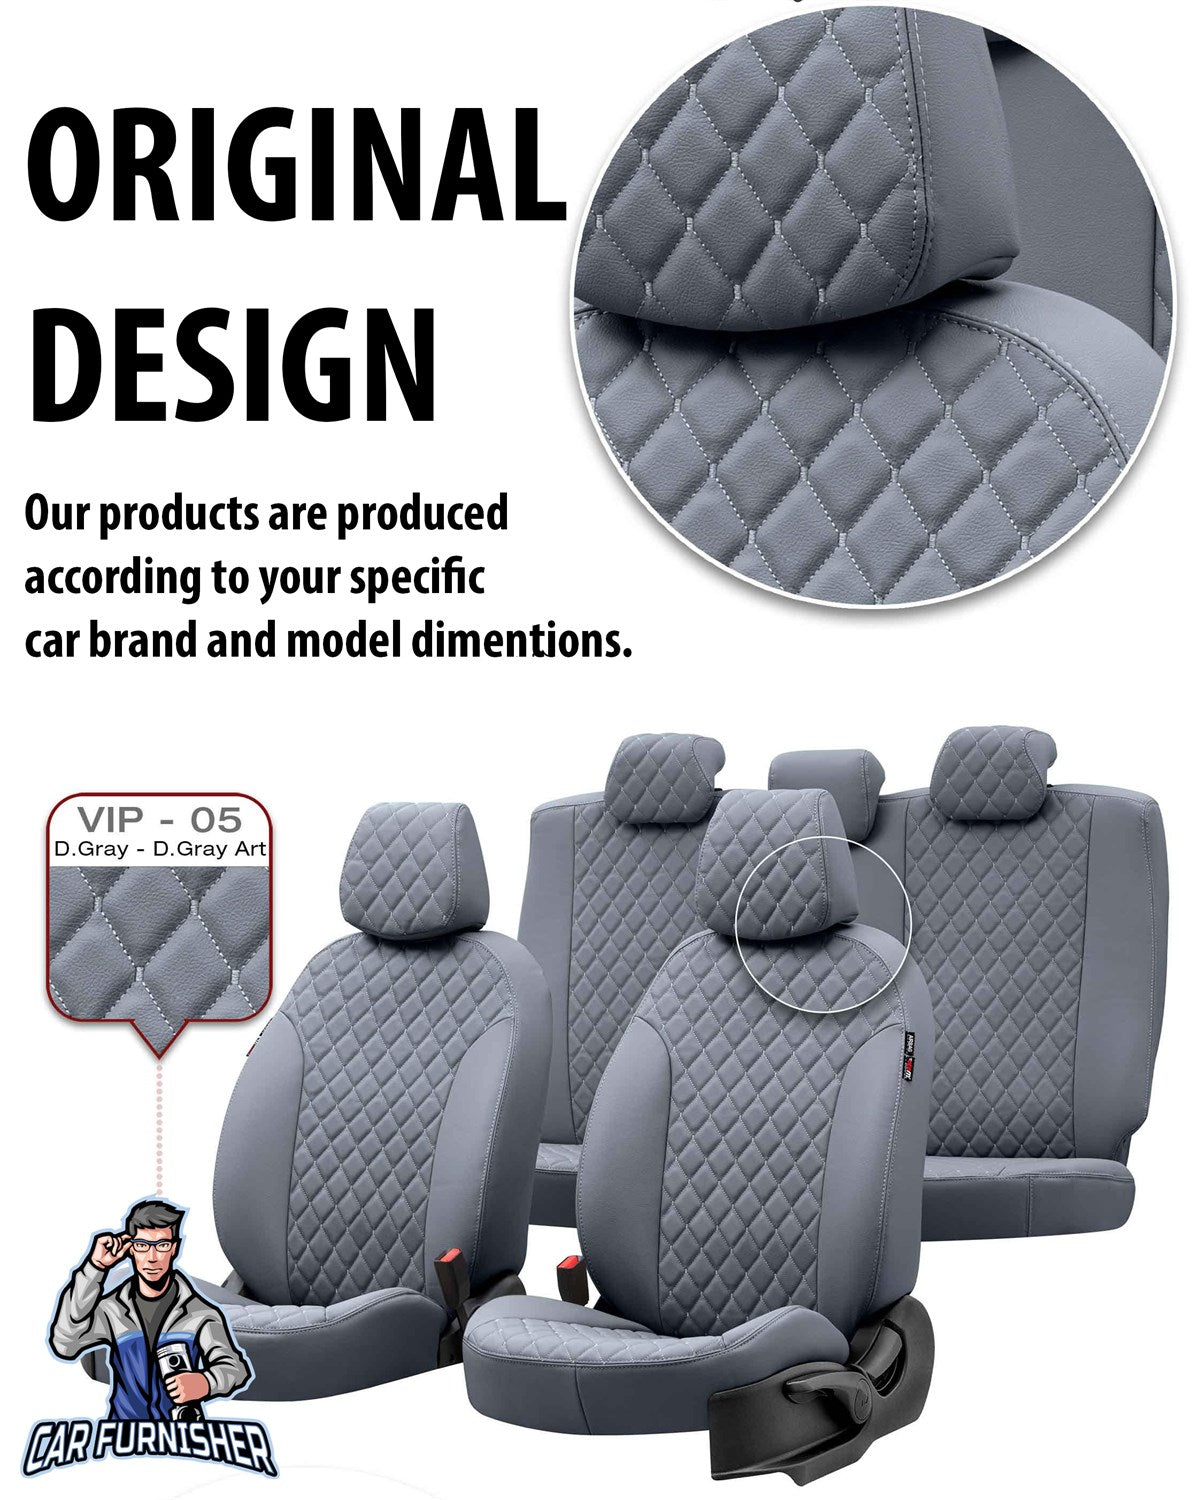 Citroen Jumpy Seat Covers Madrid Leather Design Smoked Leather